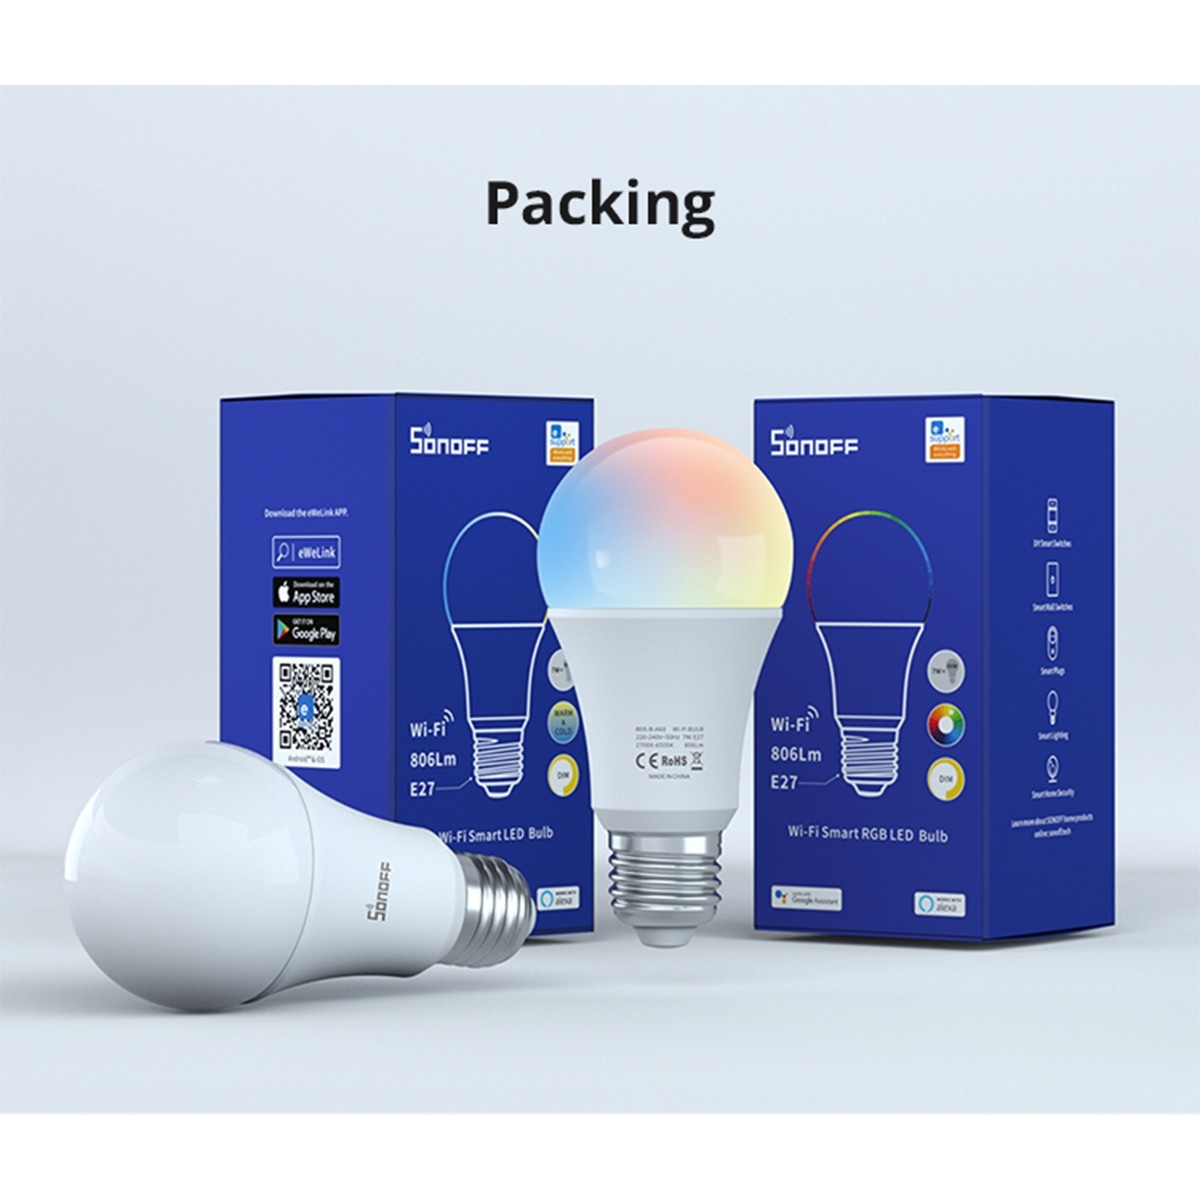 LED Λάμπα E27 Wi-Fi Smart A60 9W RGB+CCT 16M Colors & from 2700K to 6500K Dimmable SONOFF